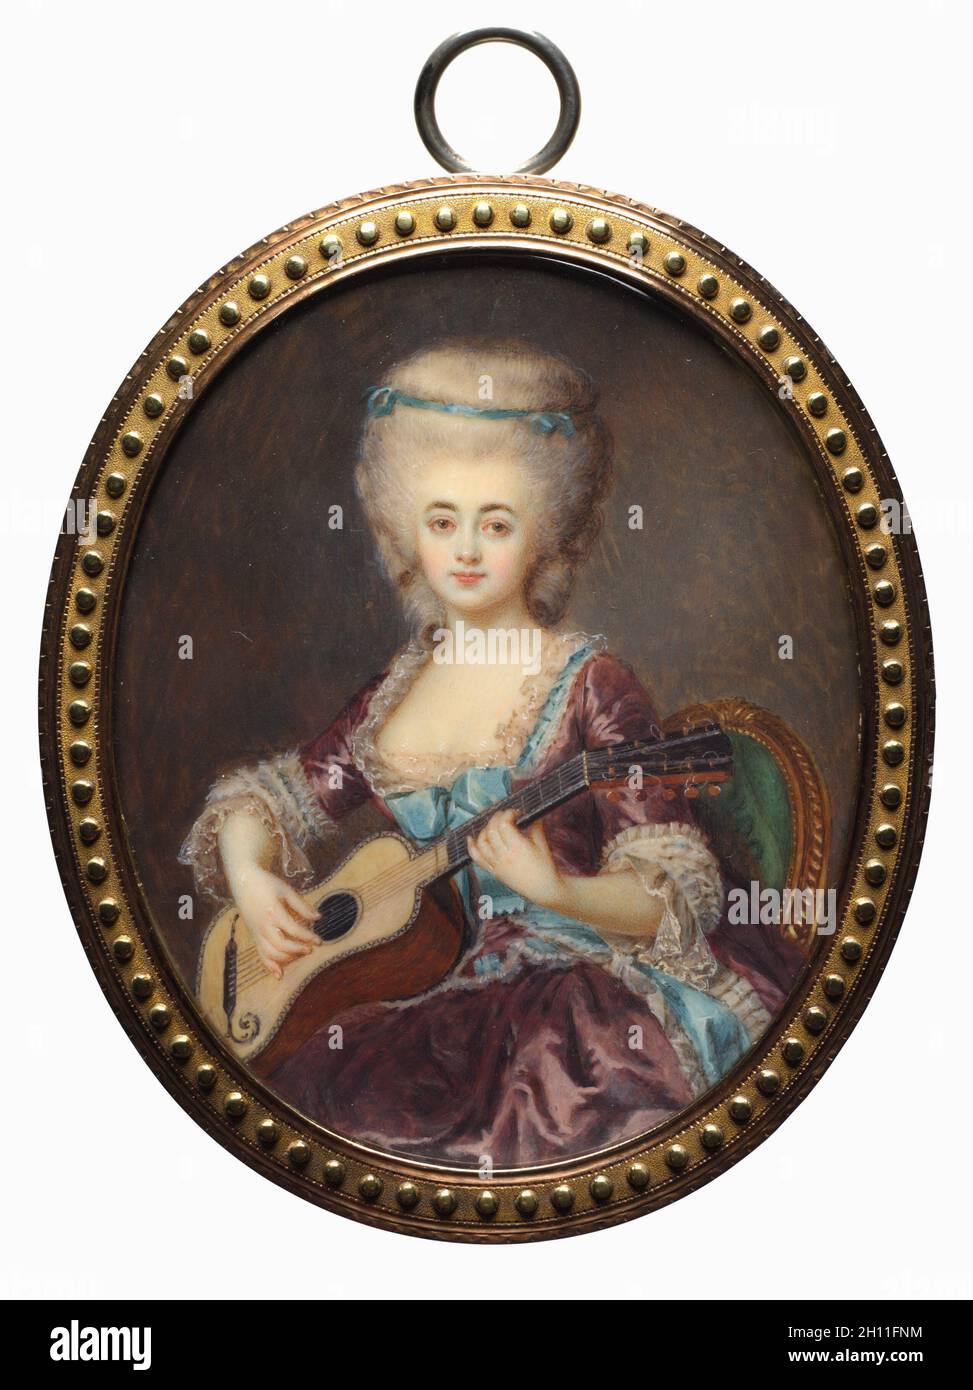 Portrait of a Woman with a Guitar, called Louise D'Aumont, Mazarin, Duchesse d'Aumont, late 18th century. Antoine Vestier (French, 1740-1824). Watercolor on ivory in gold mount; framed: 8.7 x 7.3 cm (3 7/16 x 2 7/8 in.); unframed: 7.5 x 6.1 cm (2 15/16 x 2 3/8 in.). Stock Photo